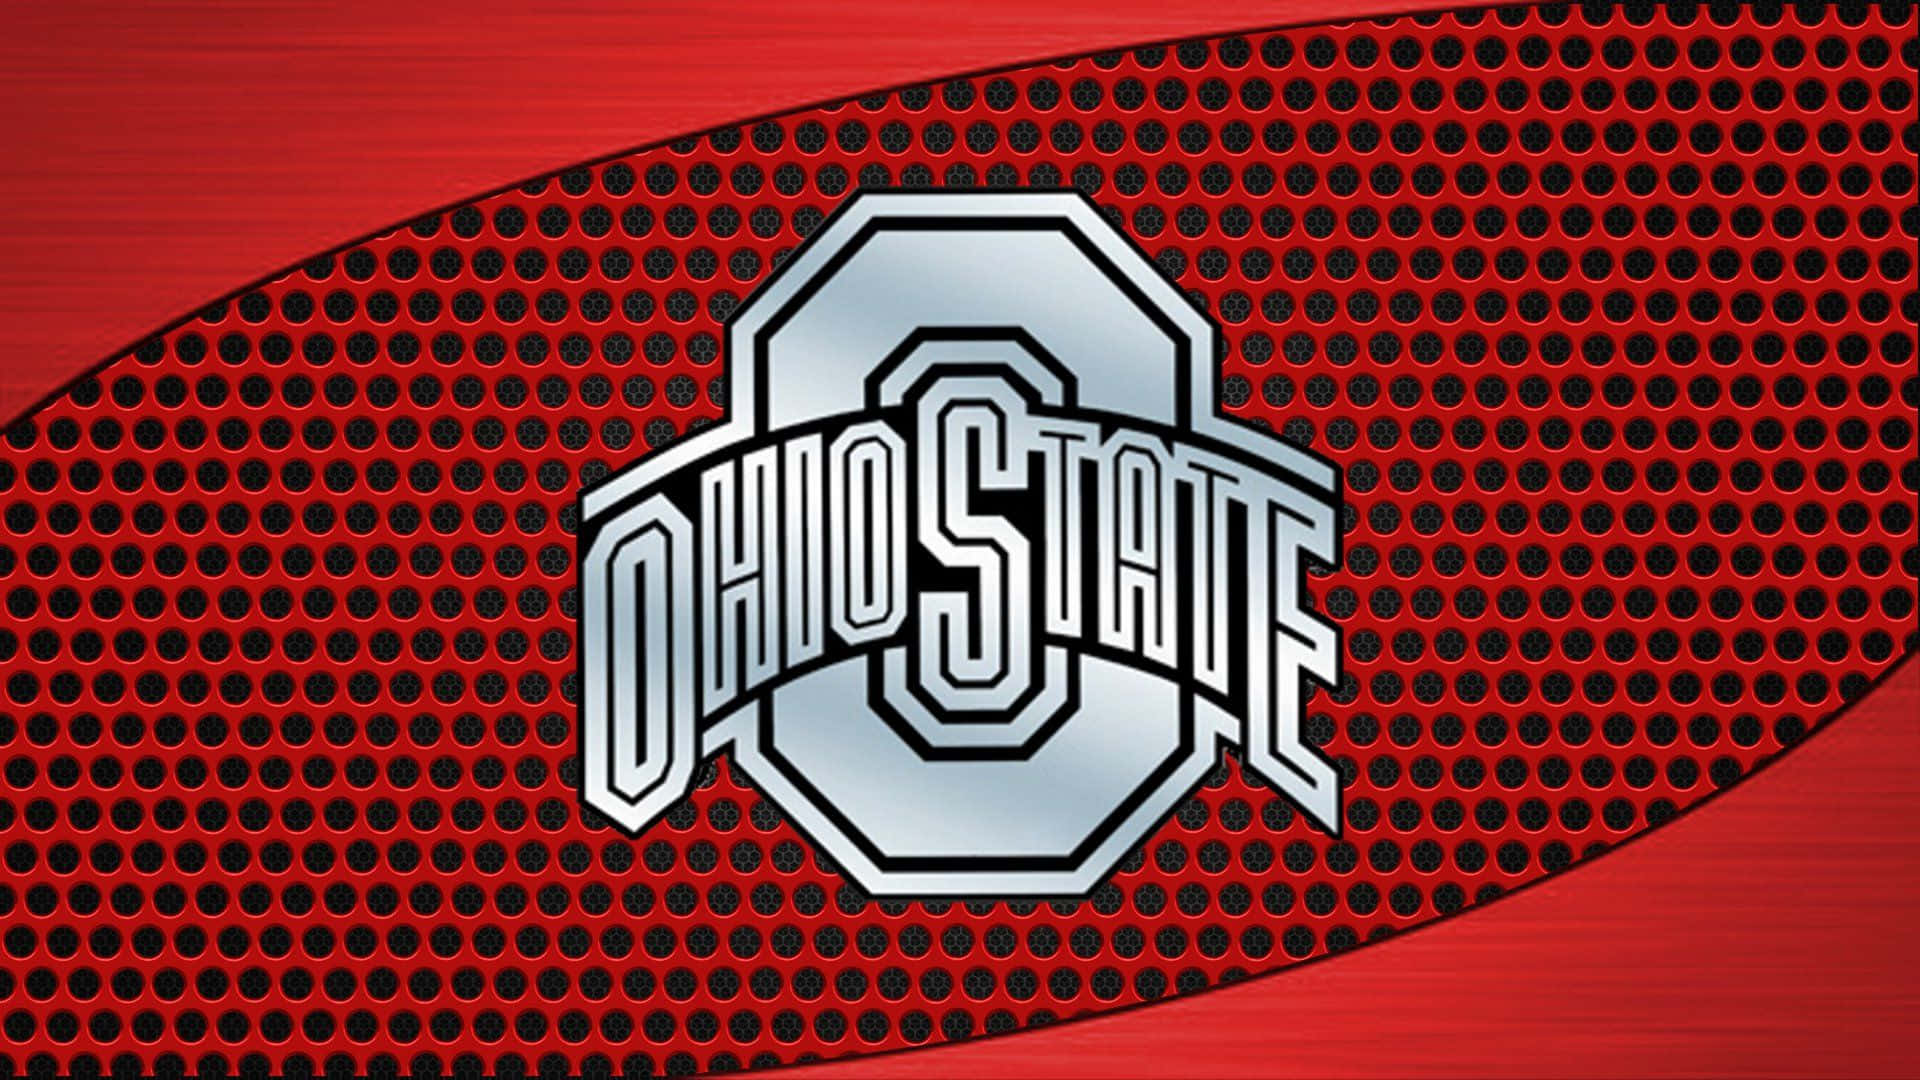 Silver Ohio State Logo Against Perforations Surface Wallpaper